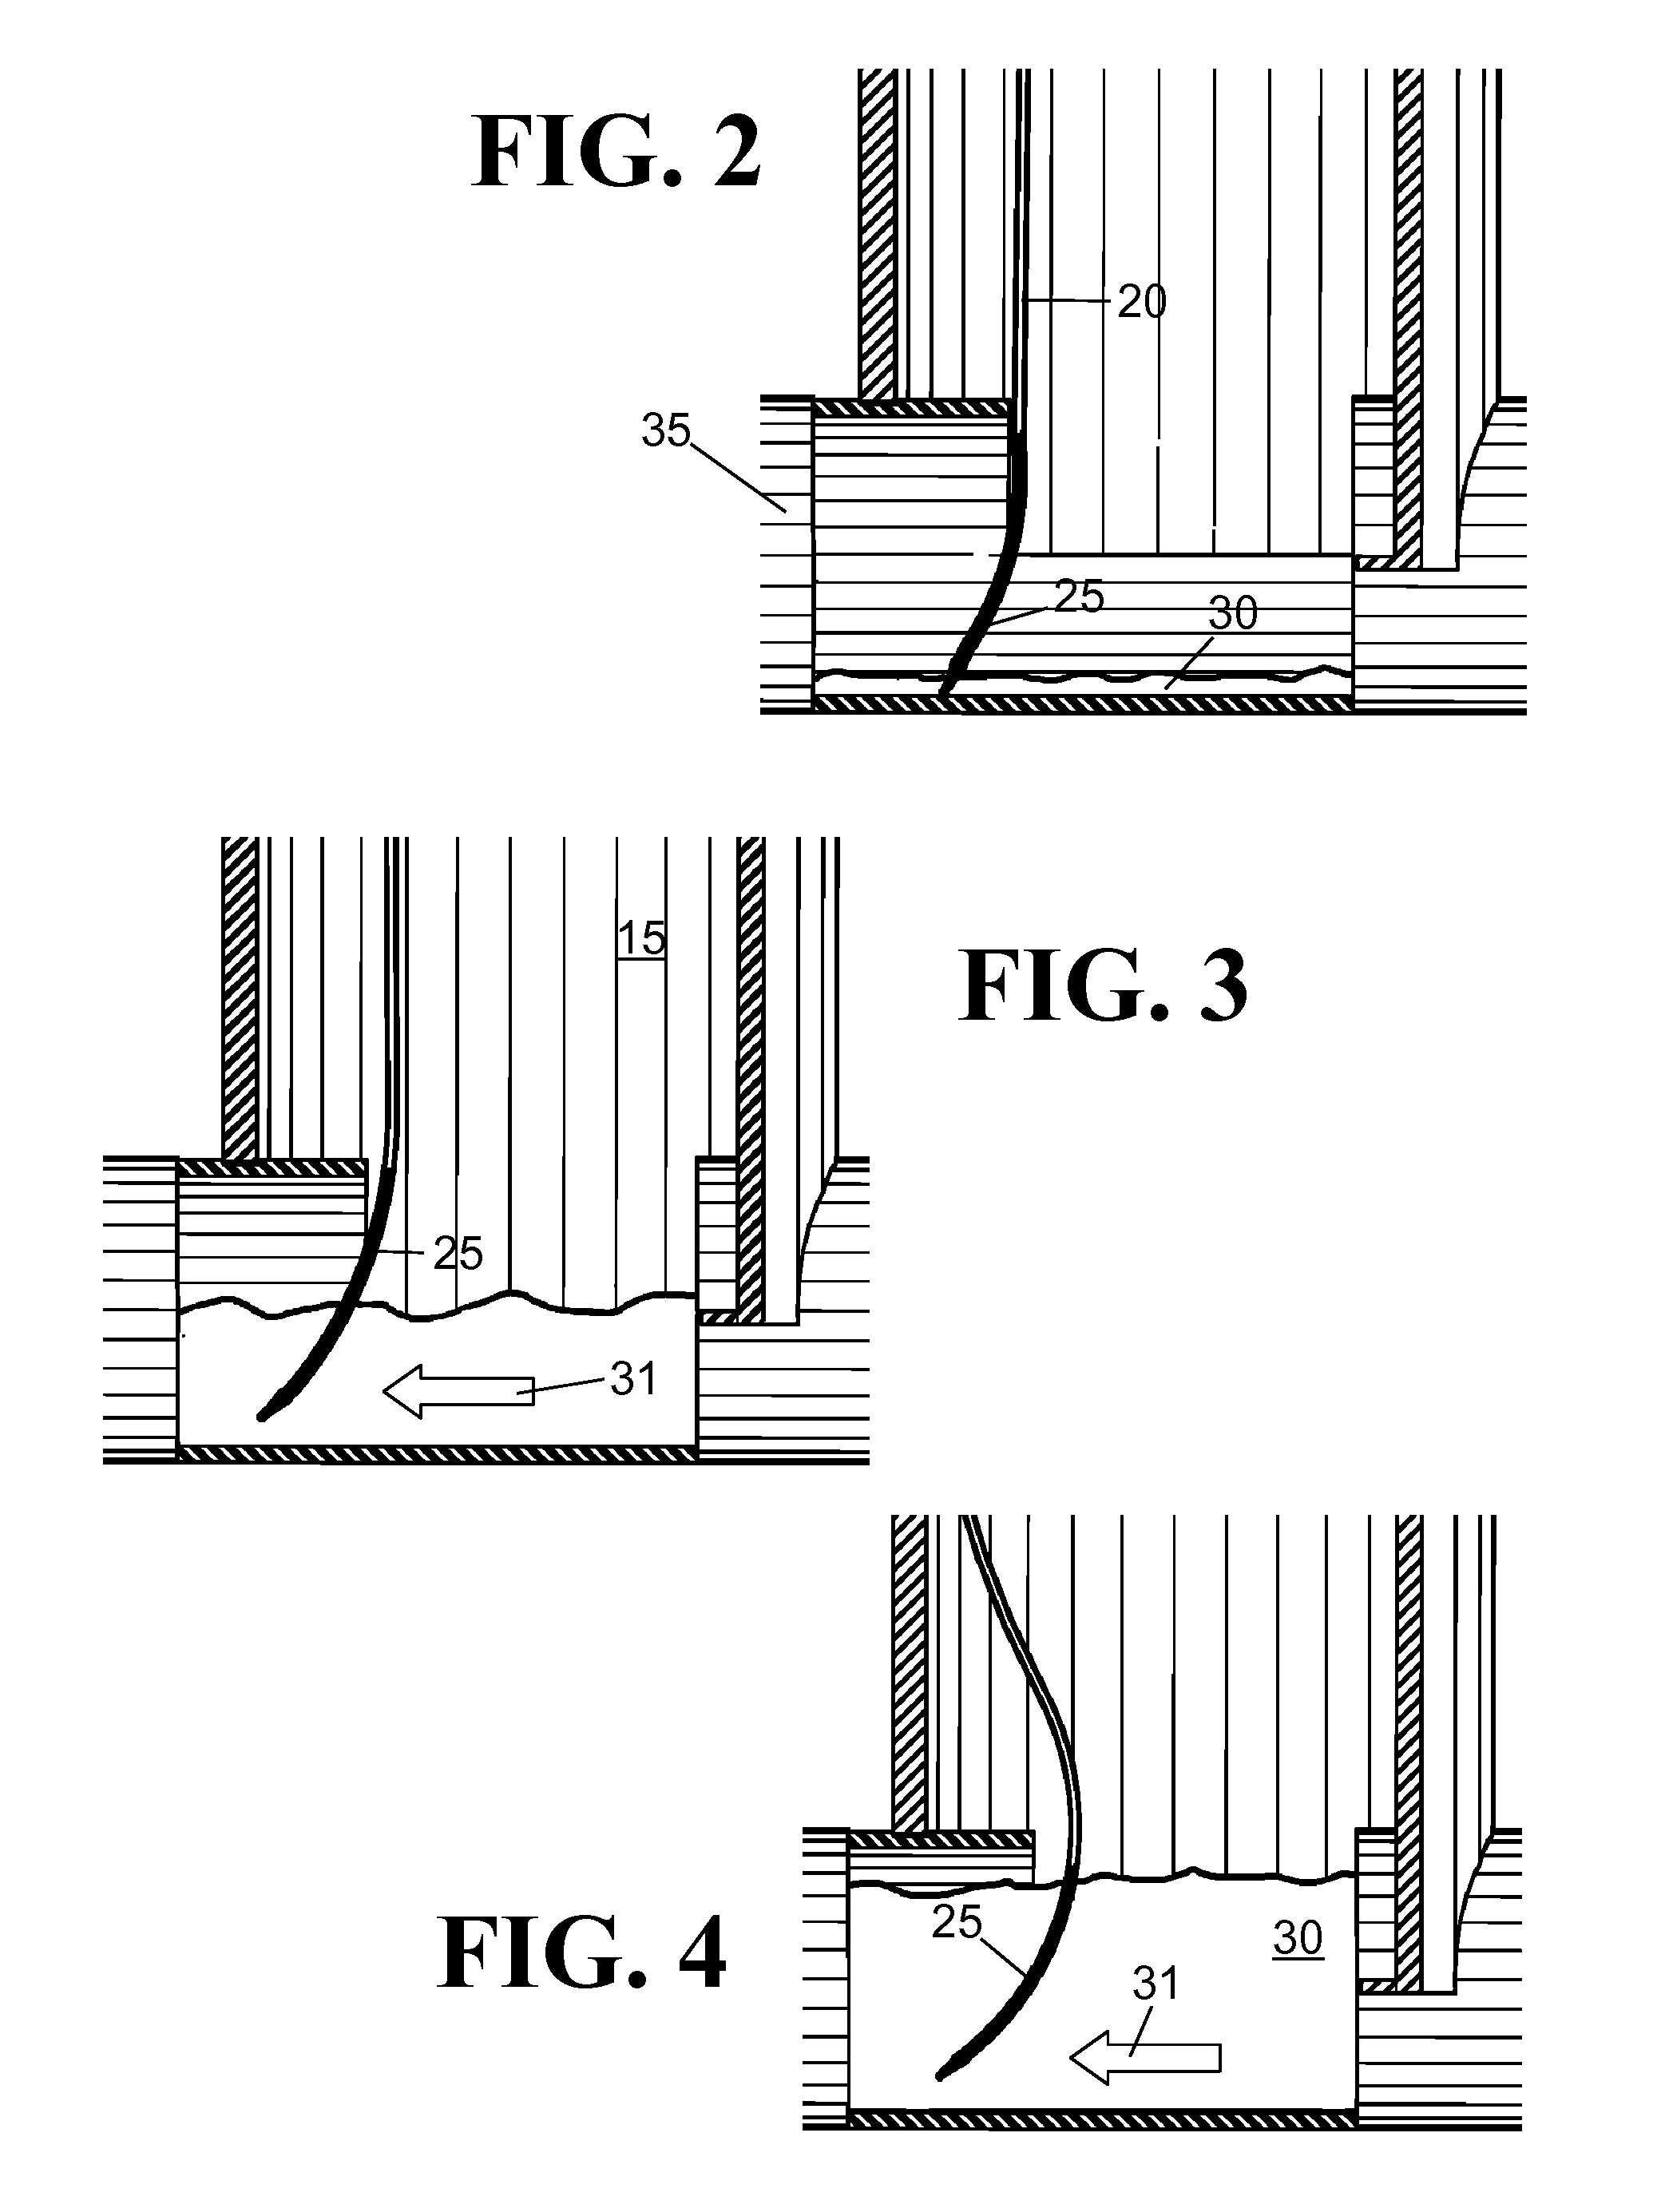 Method and device for the assessment of fluid collection networks